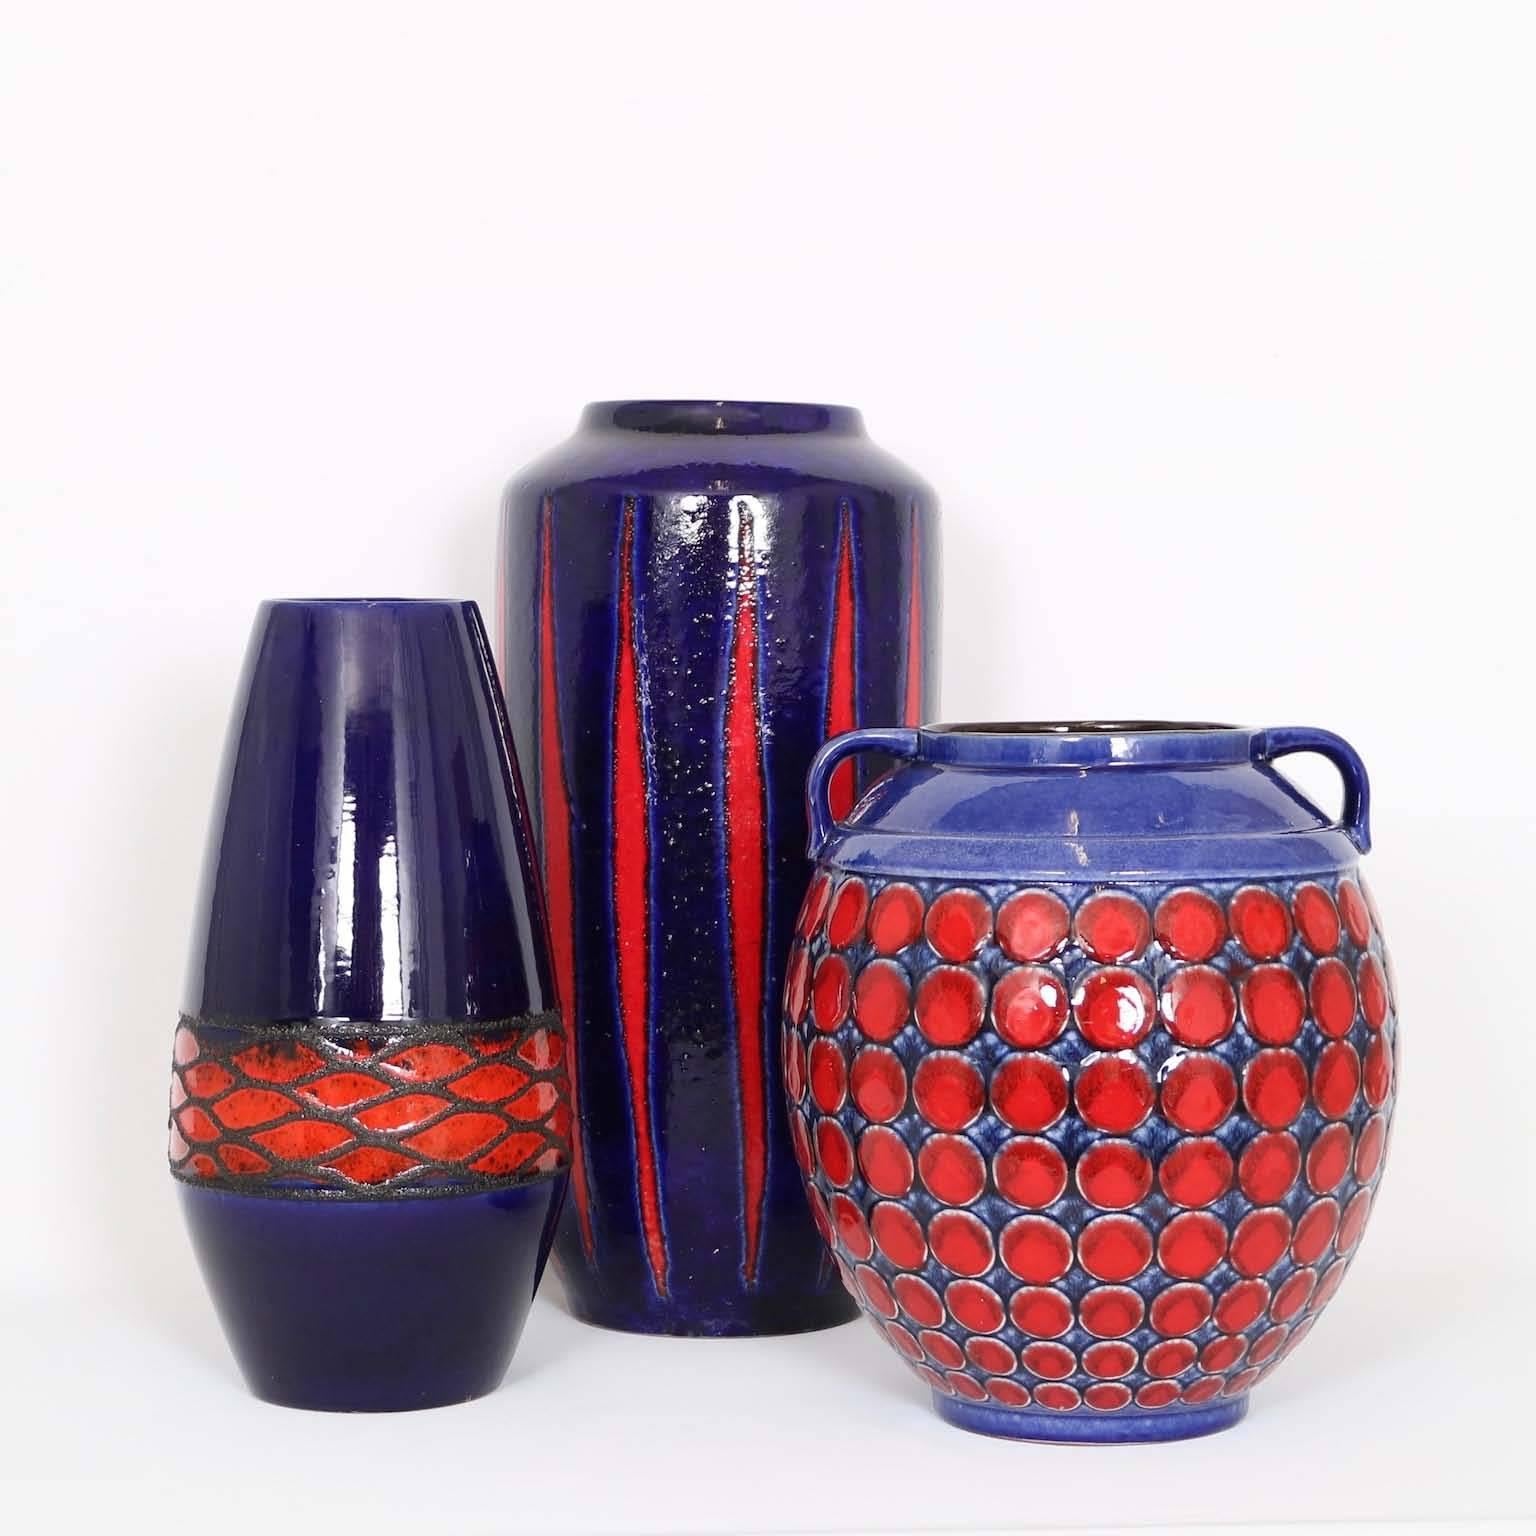 Set of three Mid-Century Modern pottery vases, in colors from navy blue to midnight blue, with red accents. Excellent vintage condition, wear consistent with age and use.

Dimensions of each in descending order:
19” height x 10” diameter.
15.5”